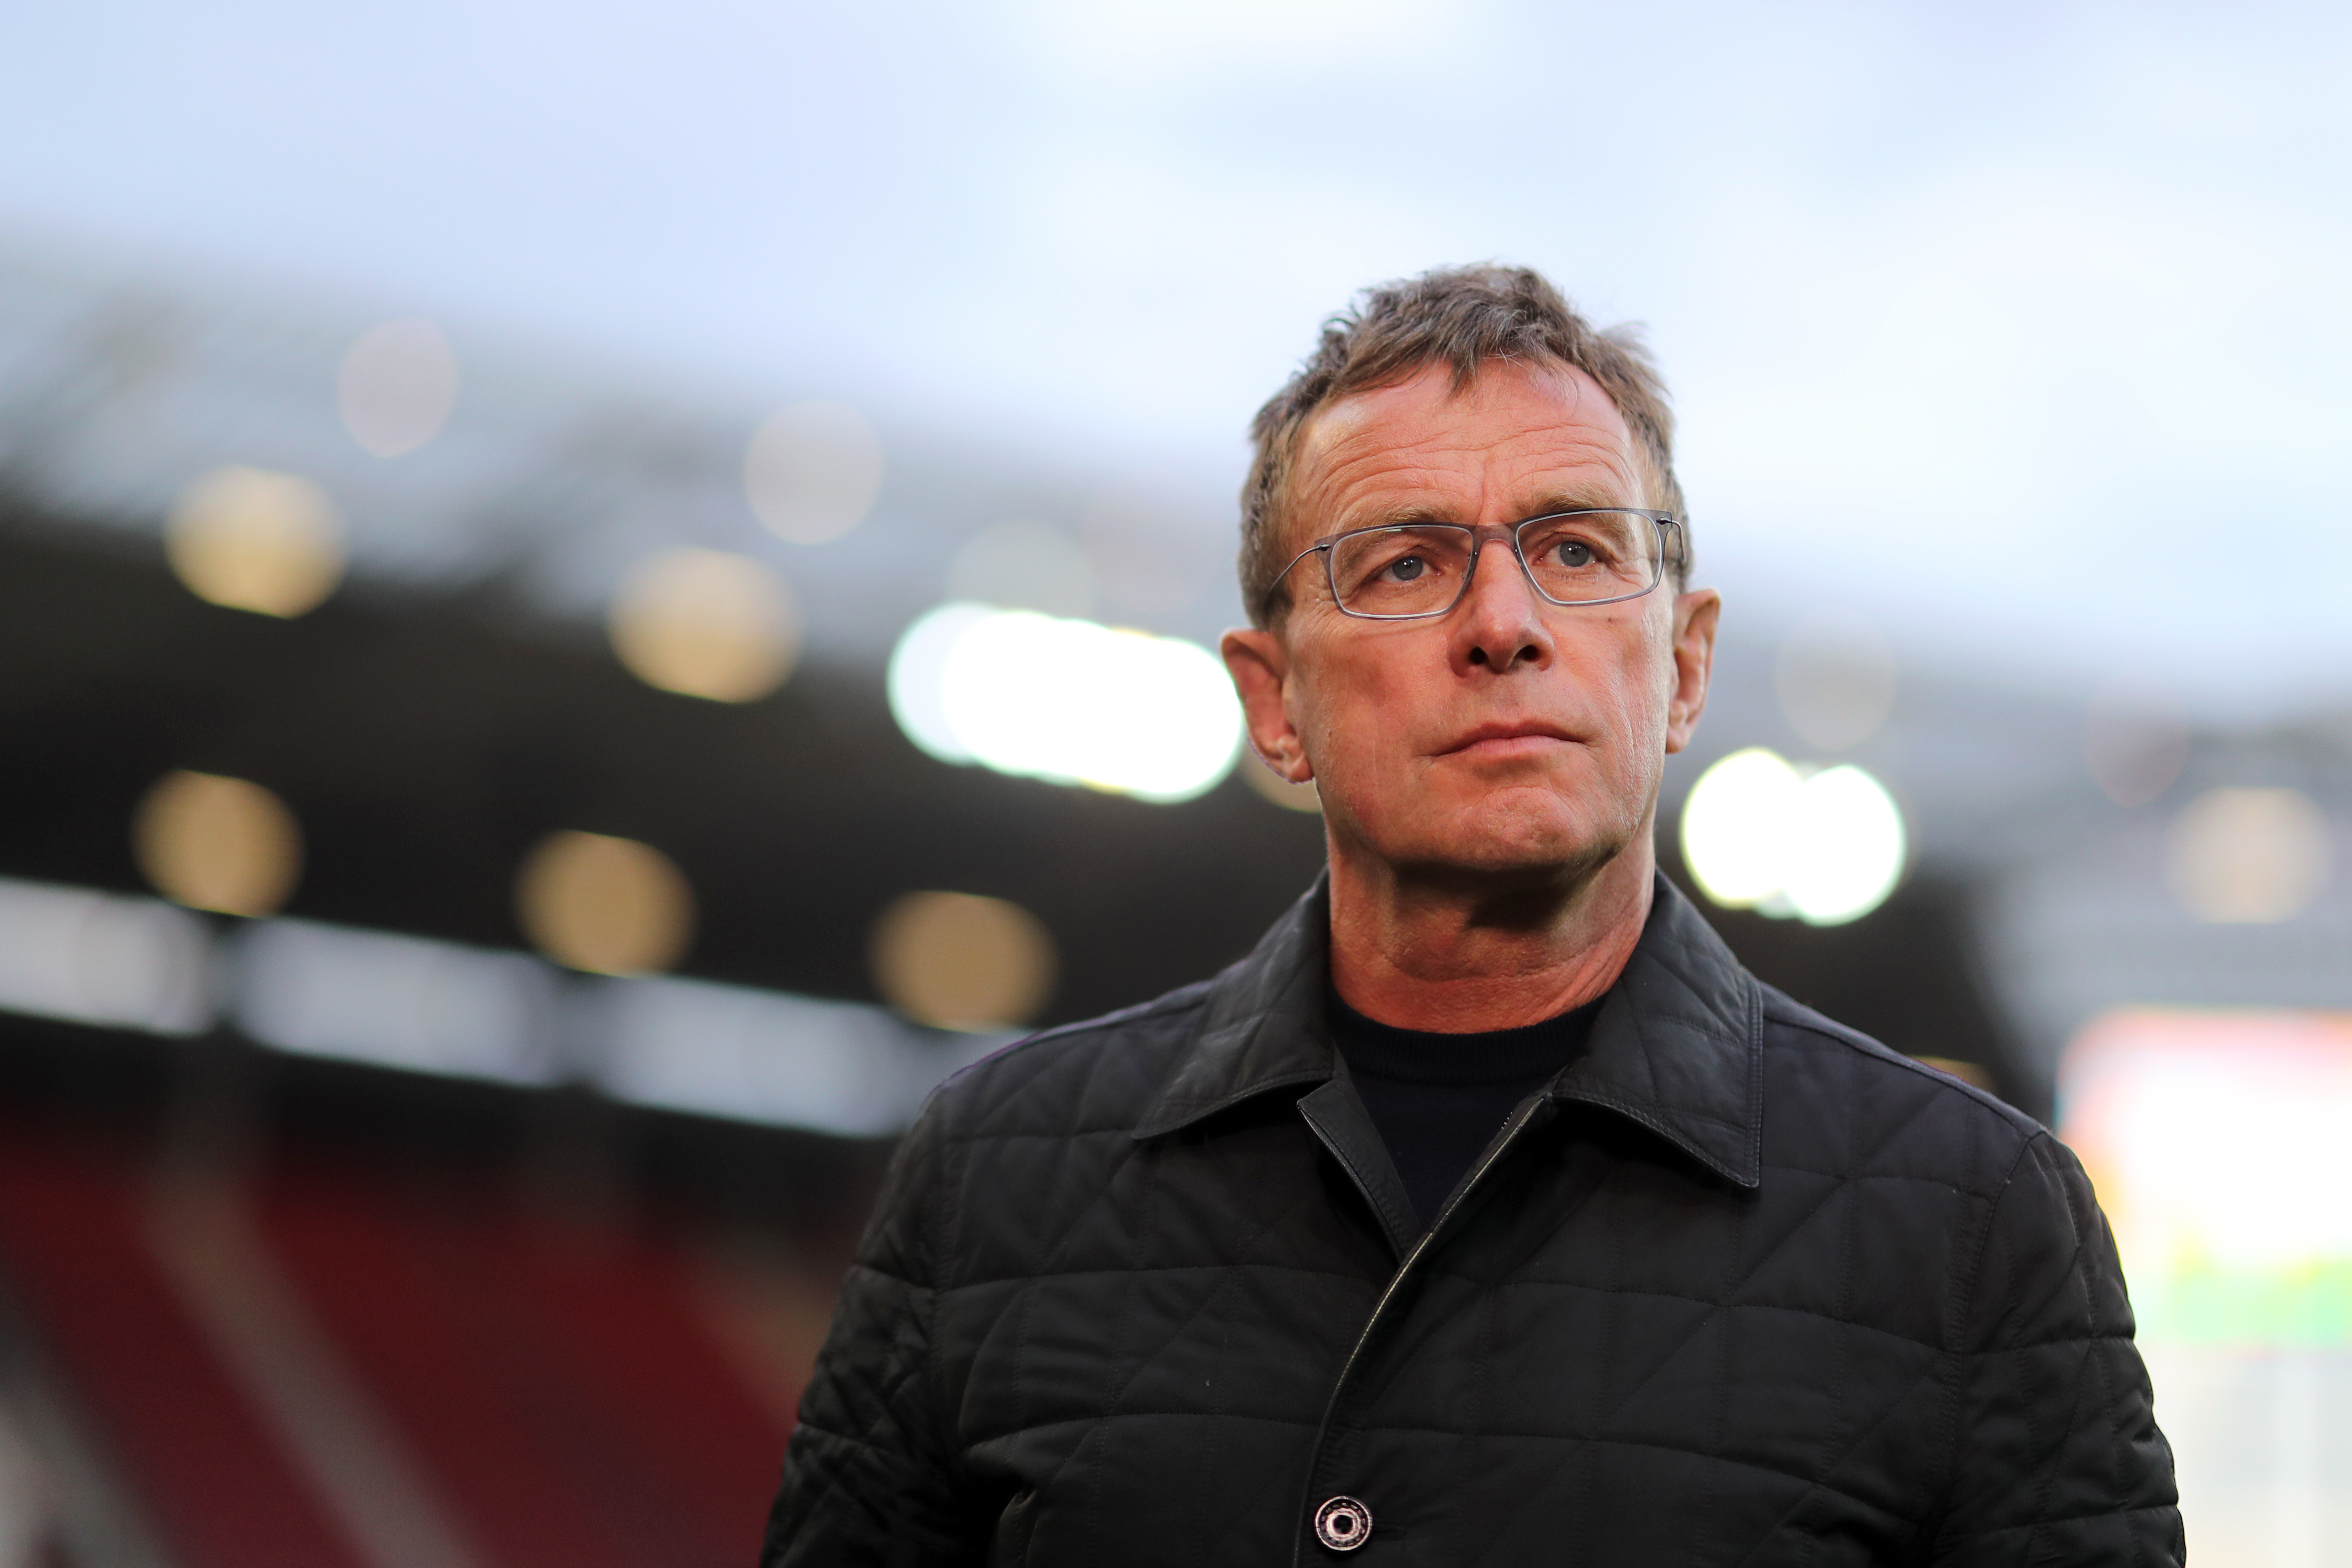 Ralf Rangnick has played a huge role in RB Leipzig's rapid rise to the top (Photo by Simon Hofmann/Bongarts/Getty Images)